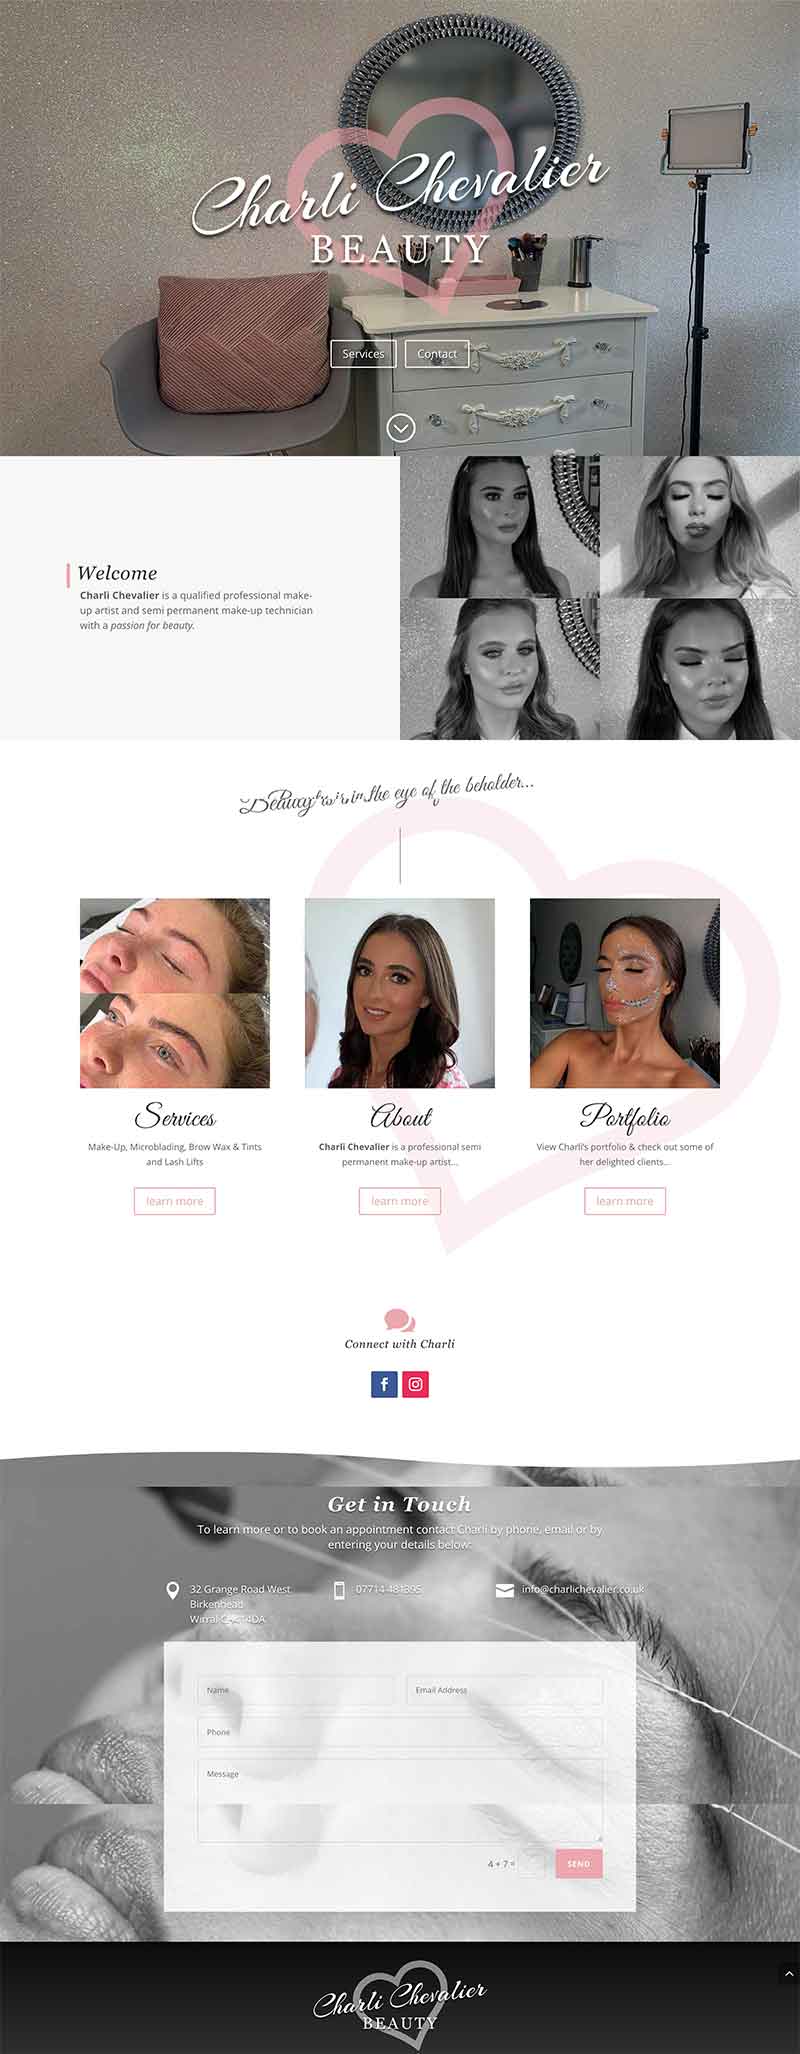 Charli Chevalier Beauty Website home page